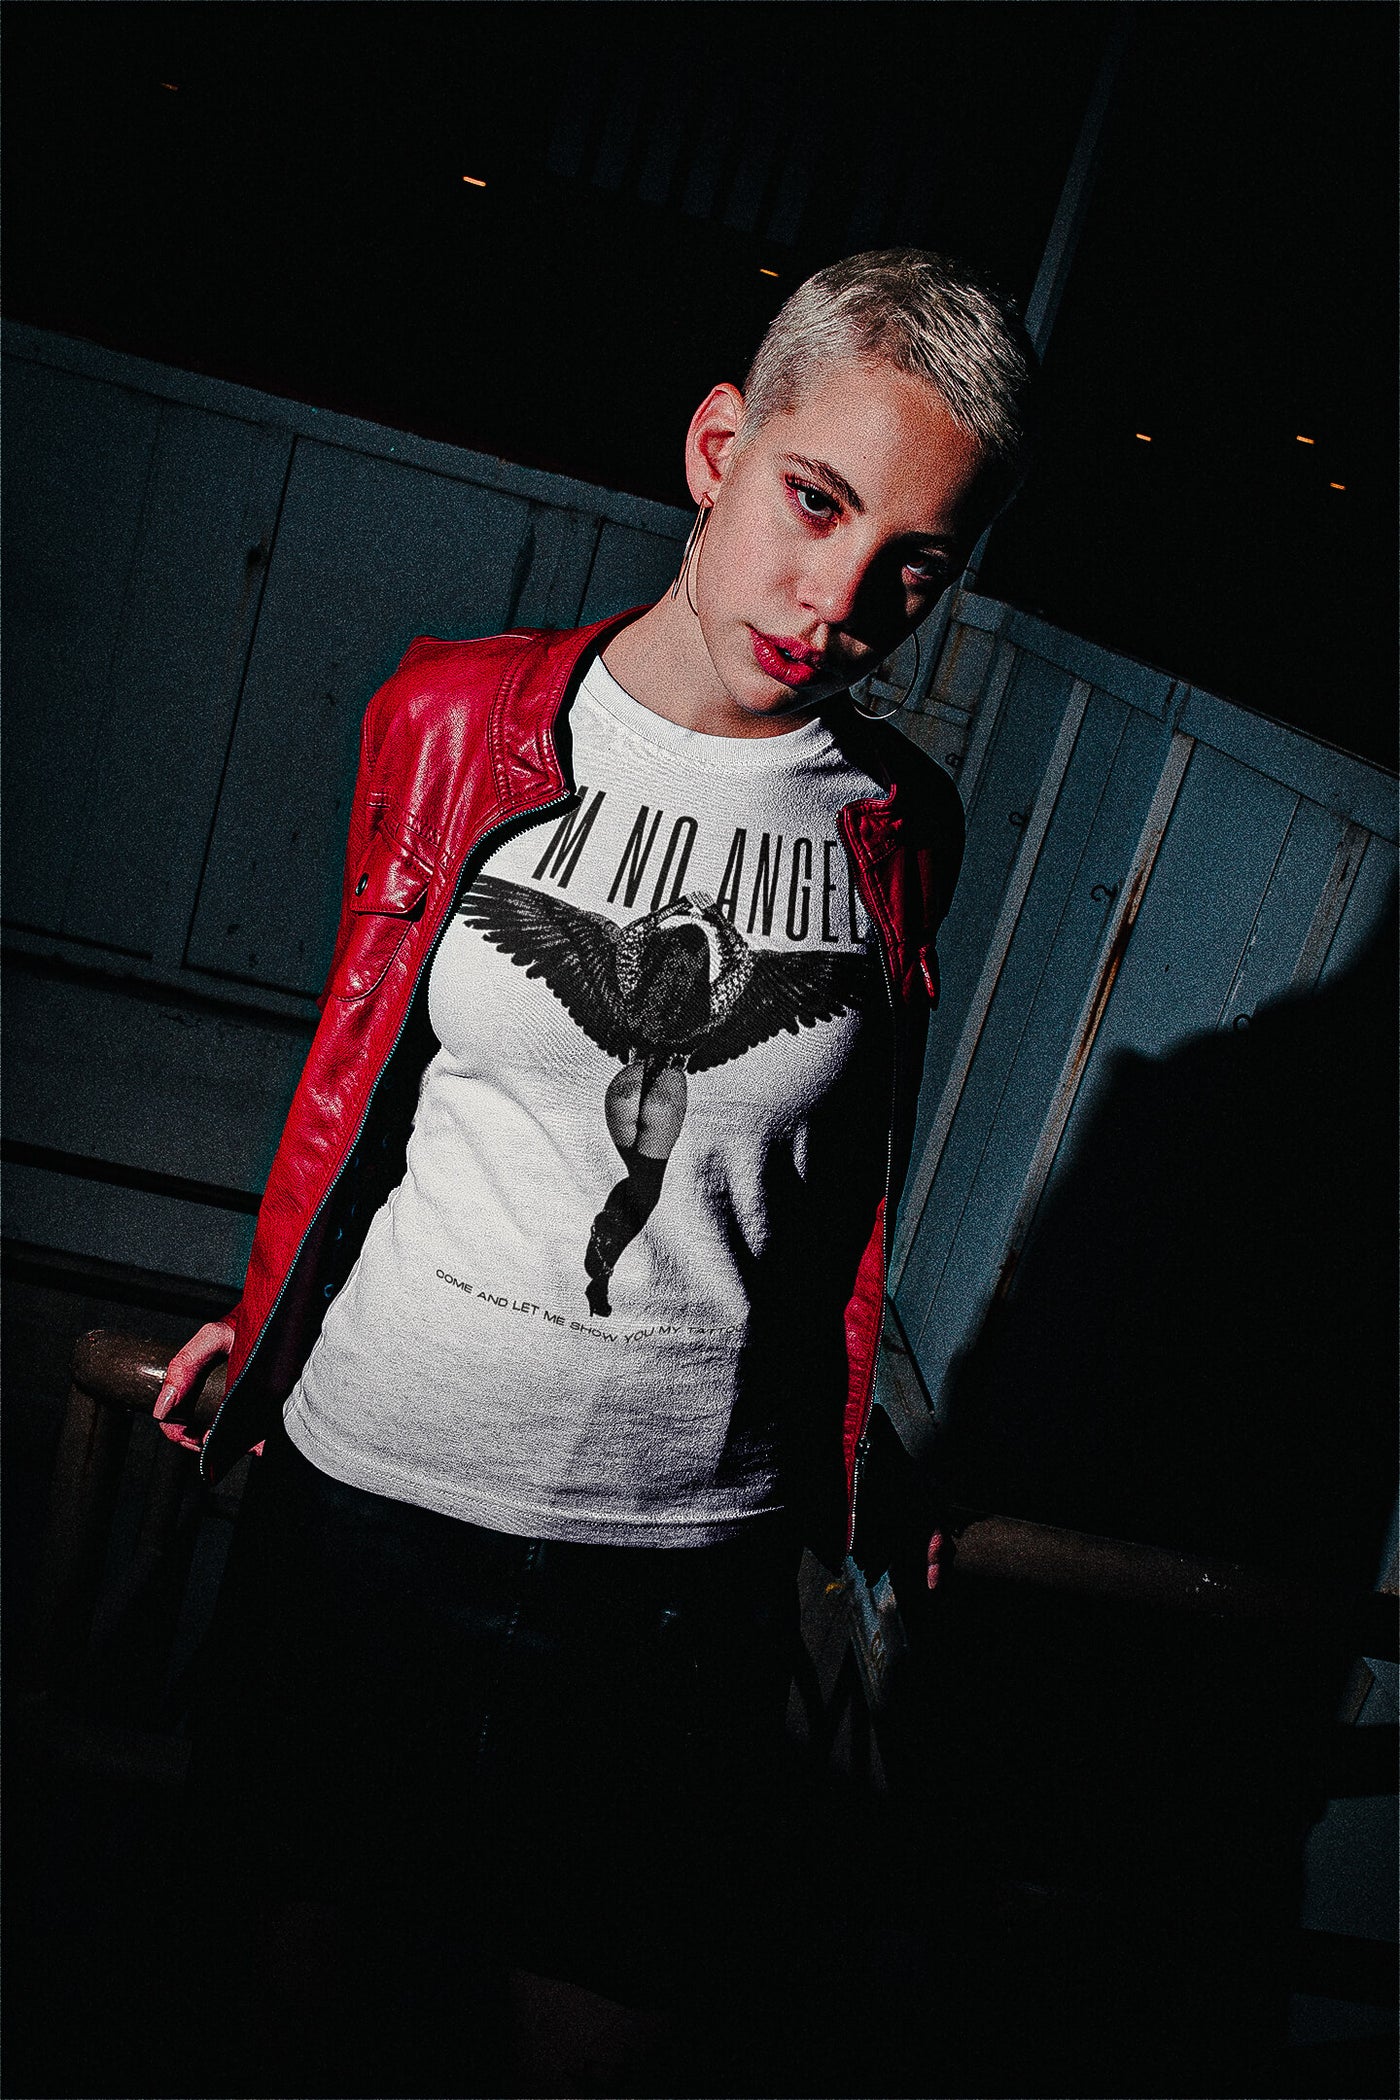 Short-haired woman in a night setting, sporting 'I'm No Angel Cher' T-shirt by Gllamazon in a mockup style, blending fashion with urban nightlife.